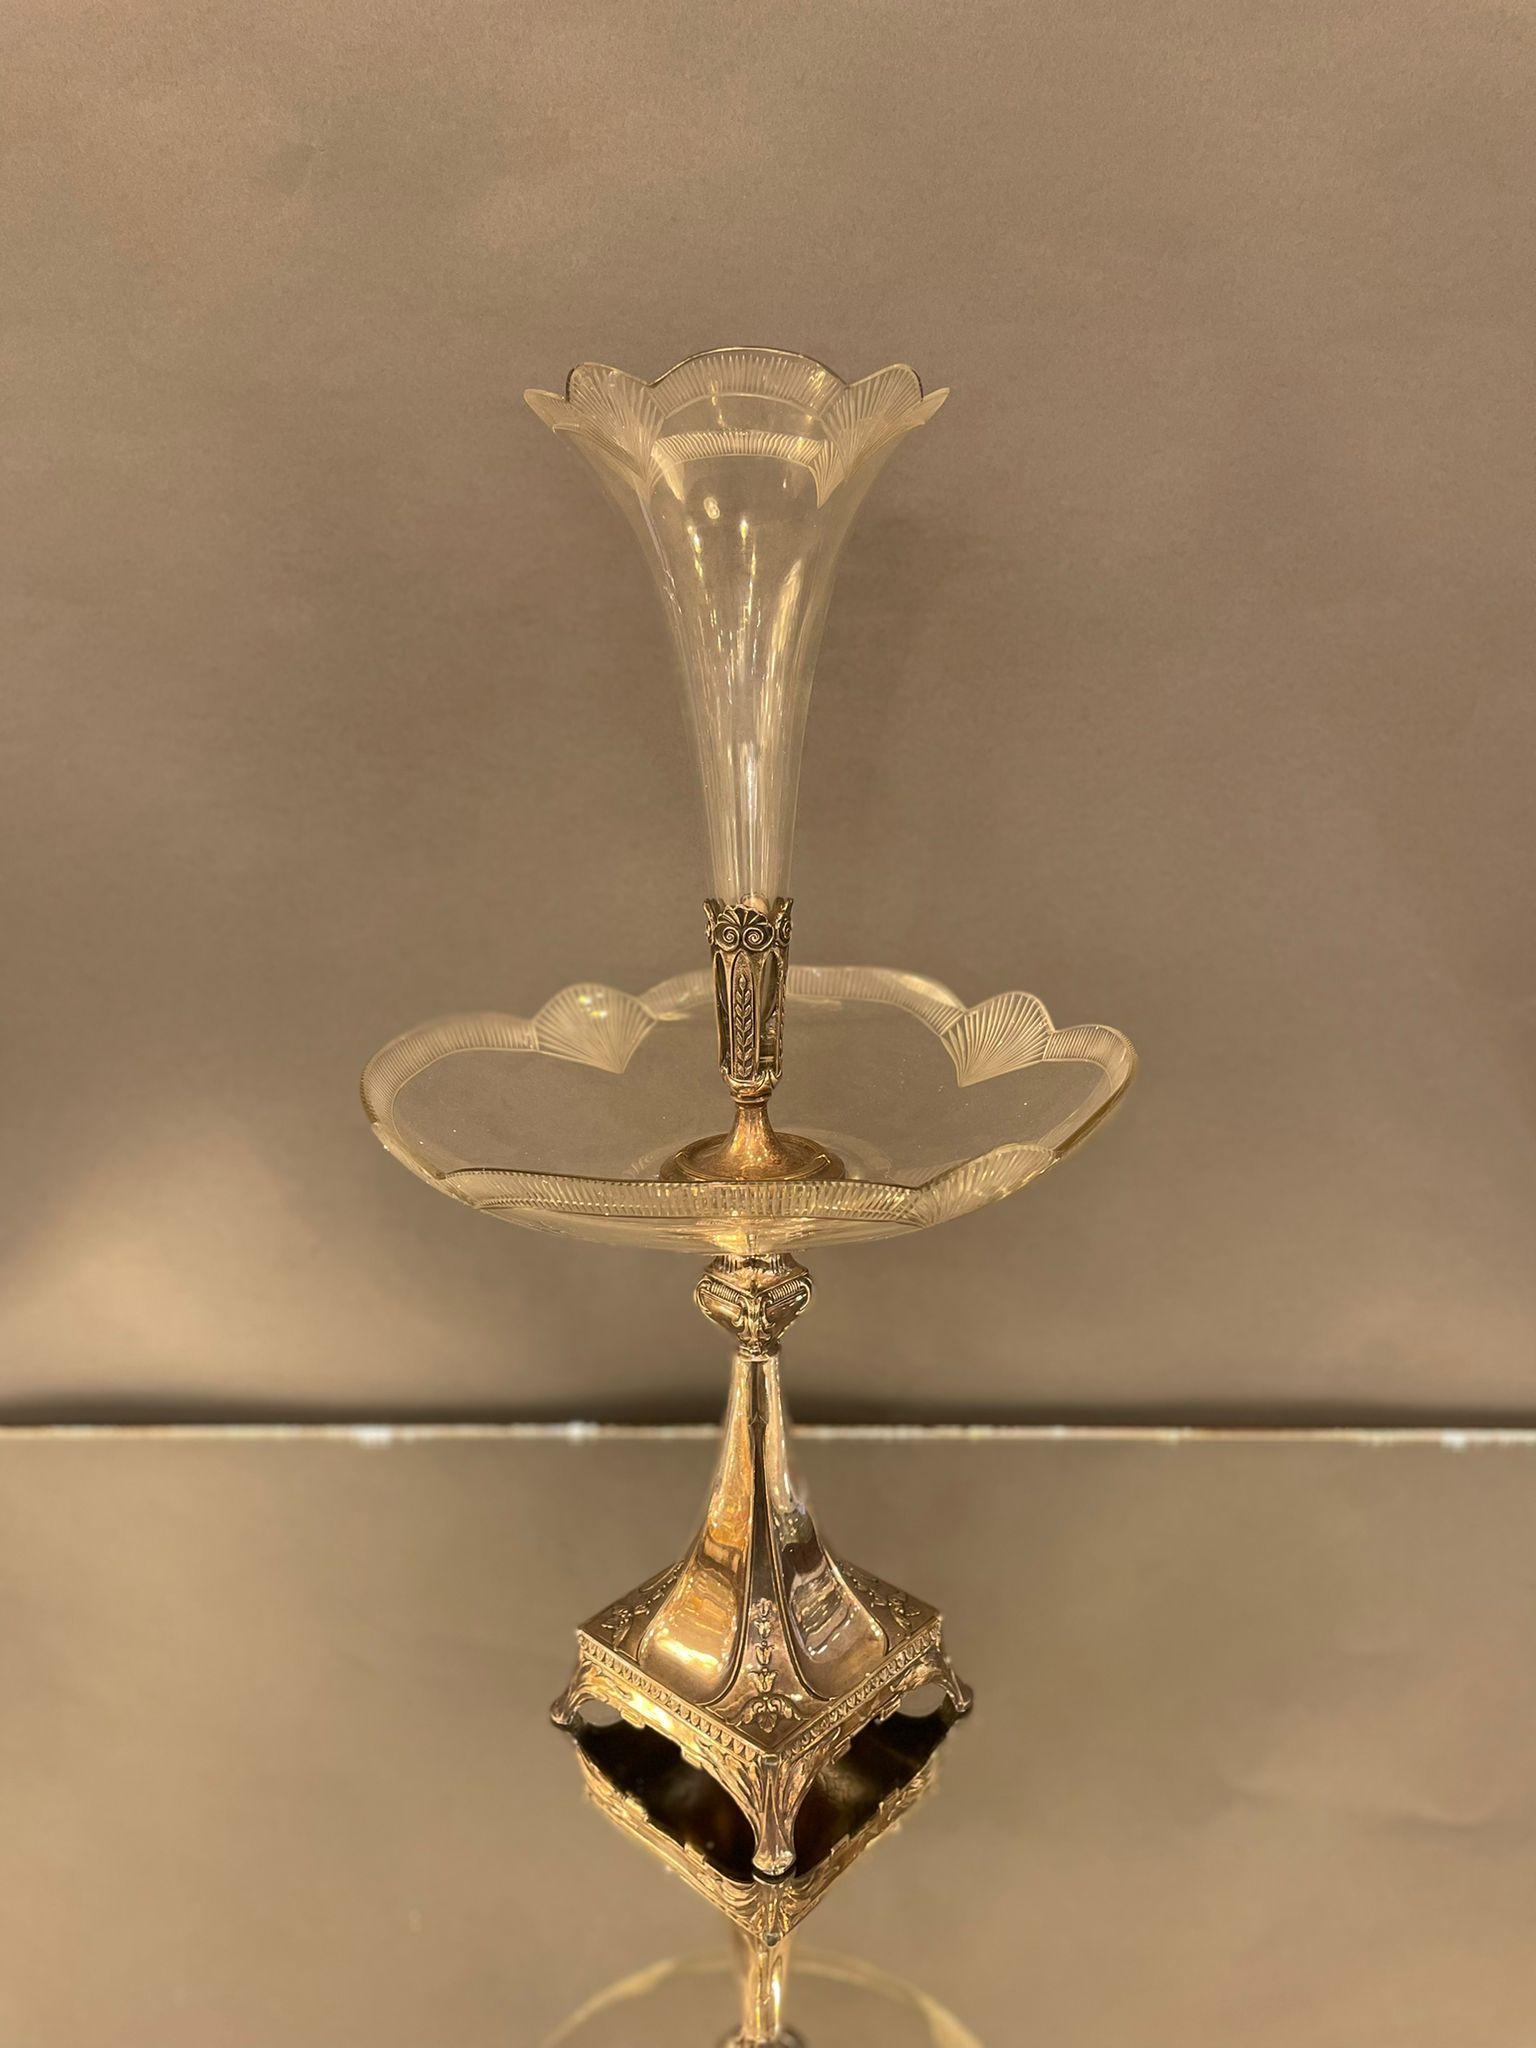 Outstanding Art Nouveau 19th Century Epergne/Centrepiece For Sale 5